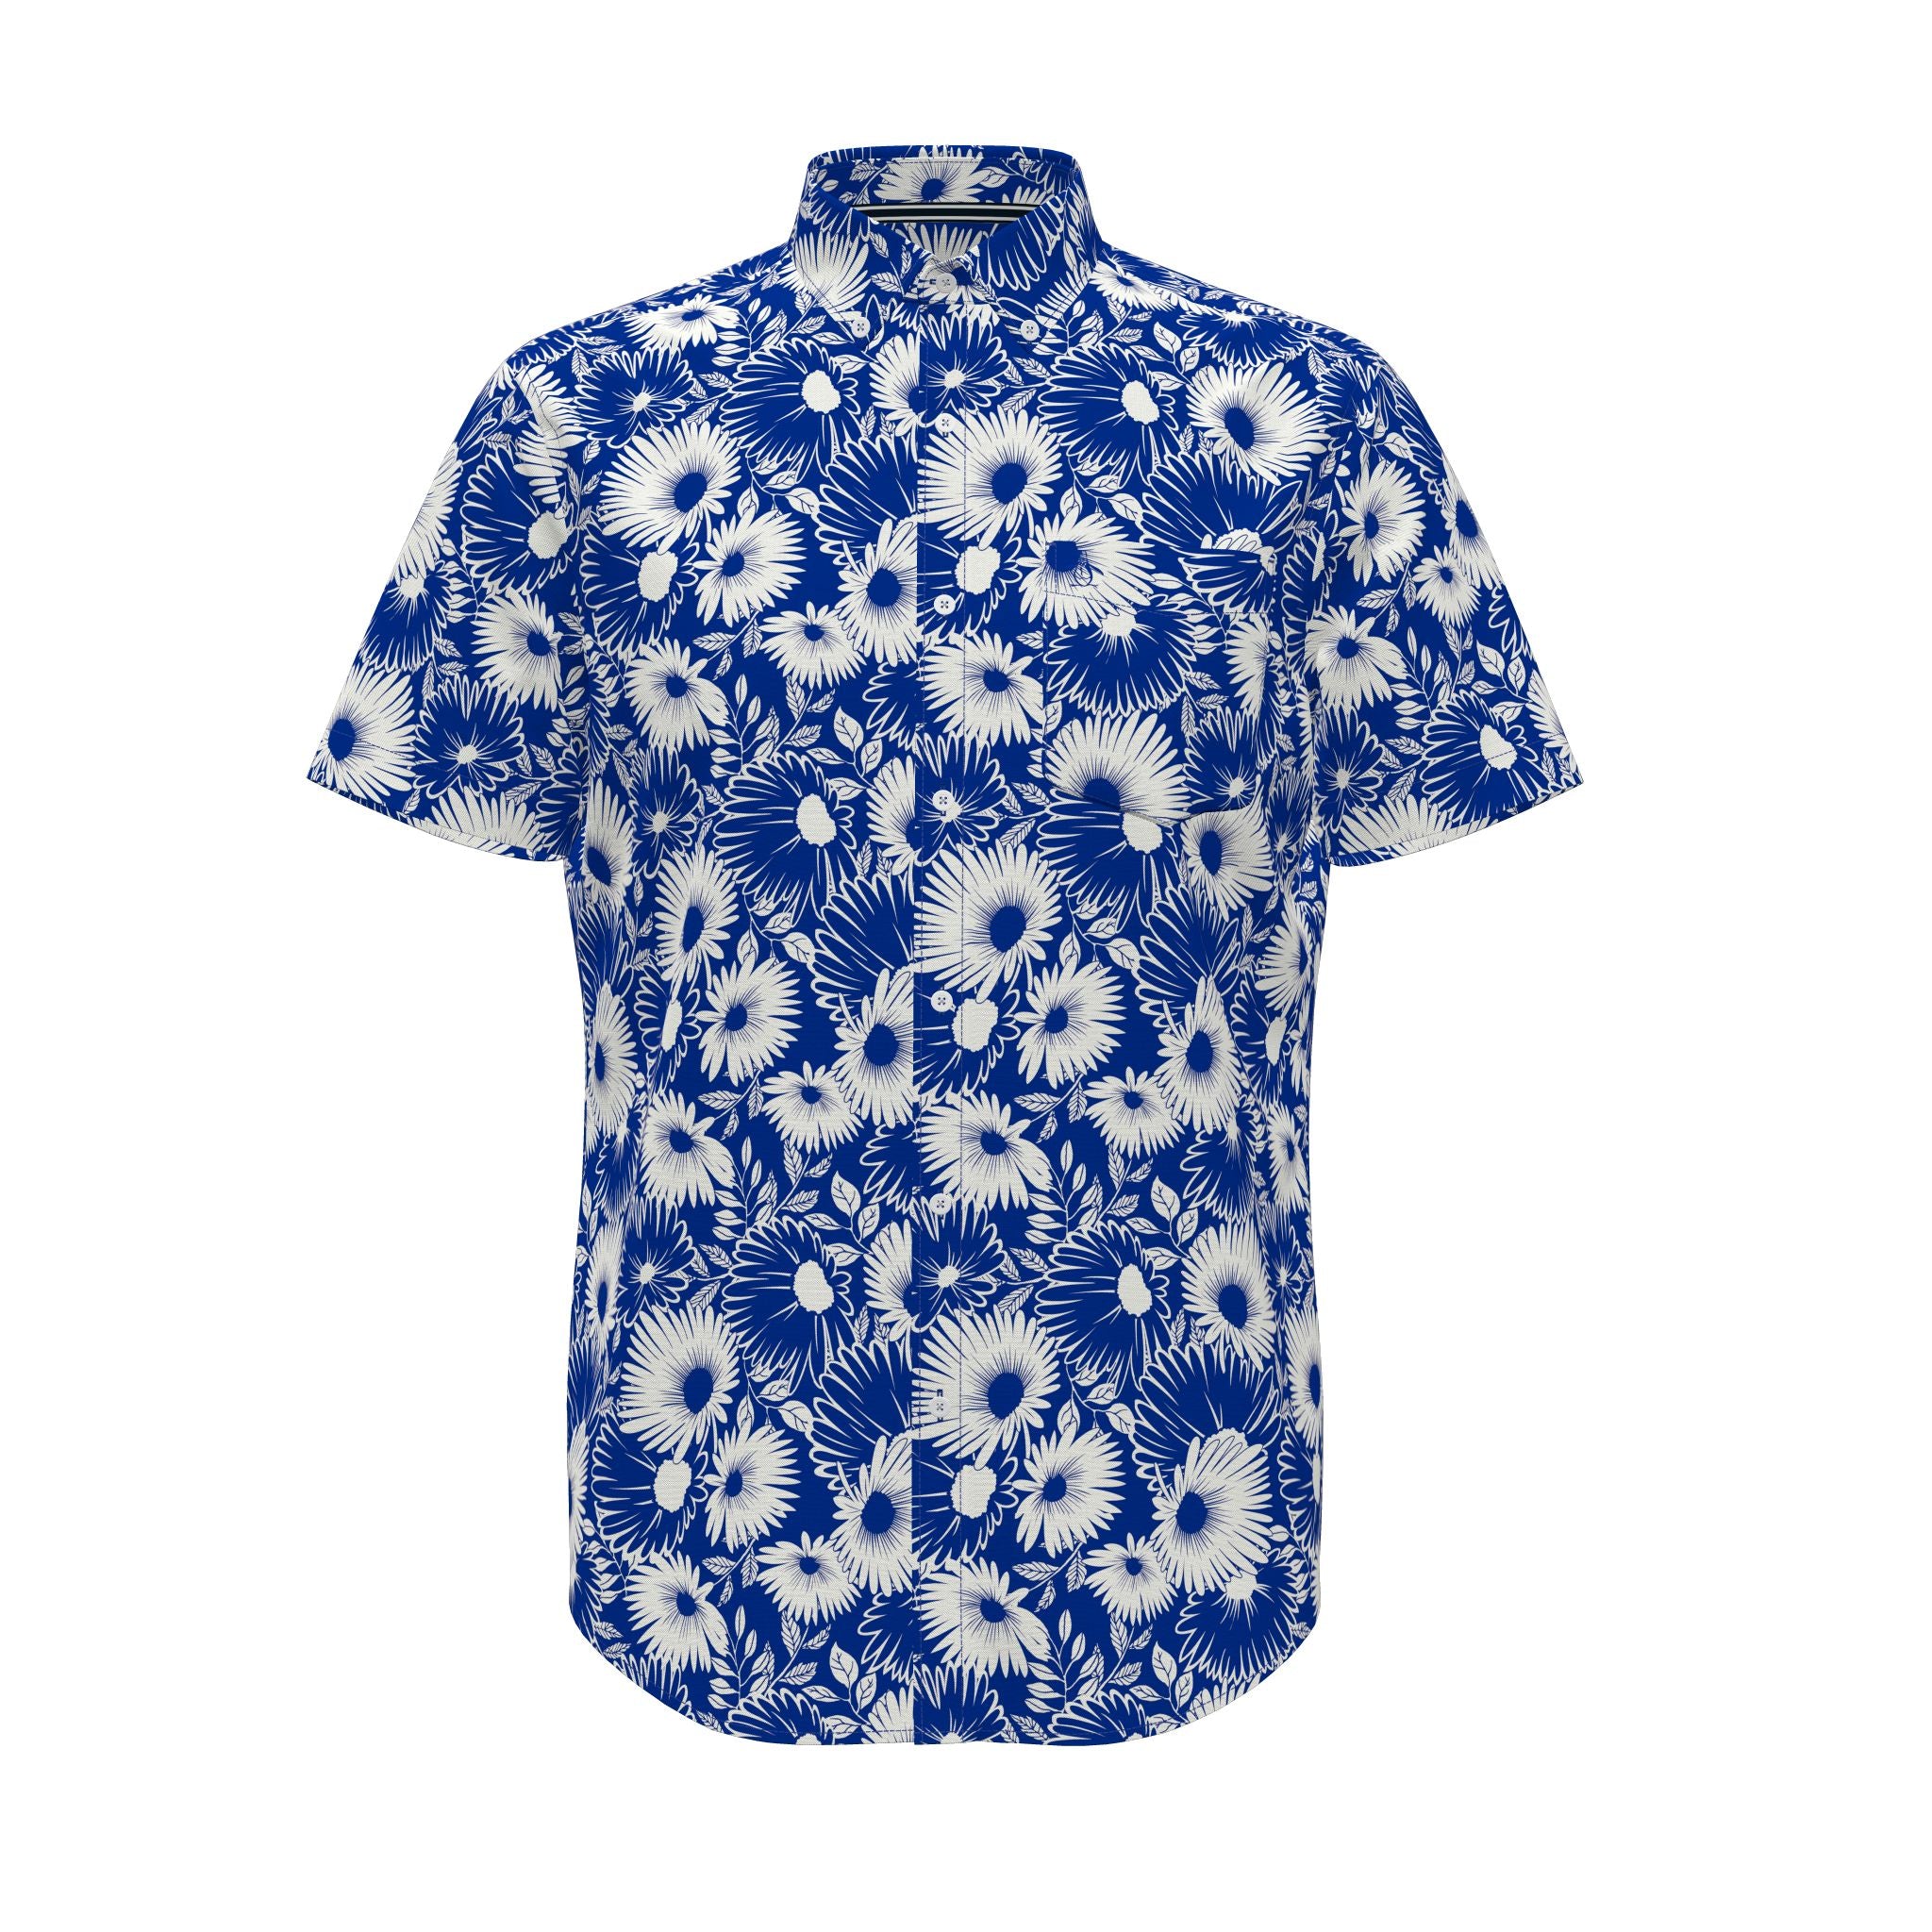 Penguin - Short Sleeve Button Up in Blue/White Floral